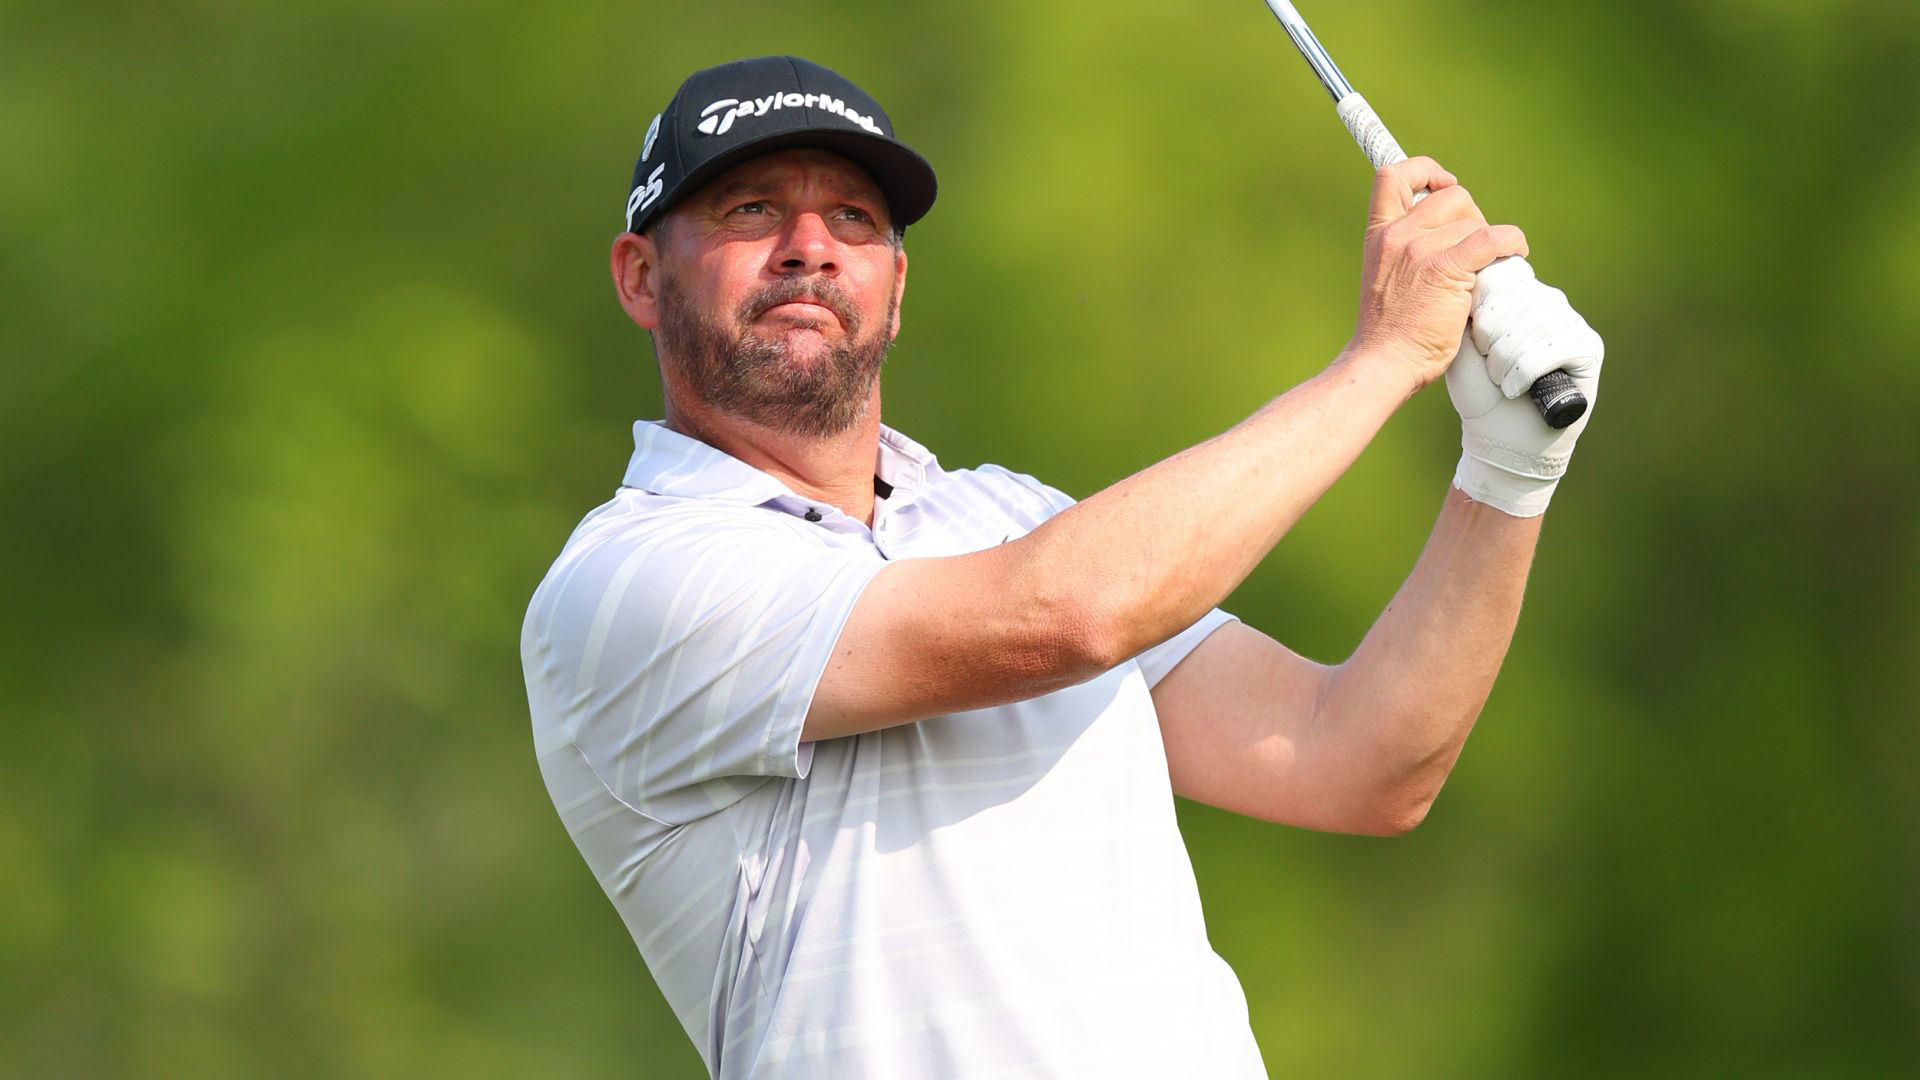 Michael Block Offered $50,000 For Hole-In-One 7-Iron From PGA Championship